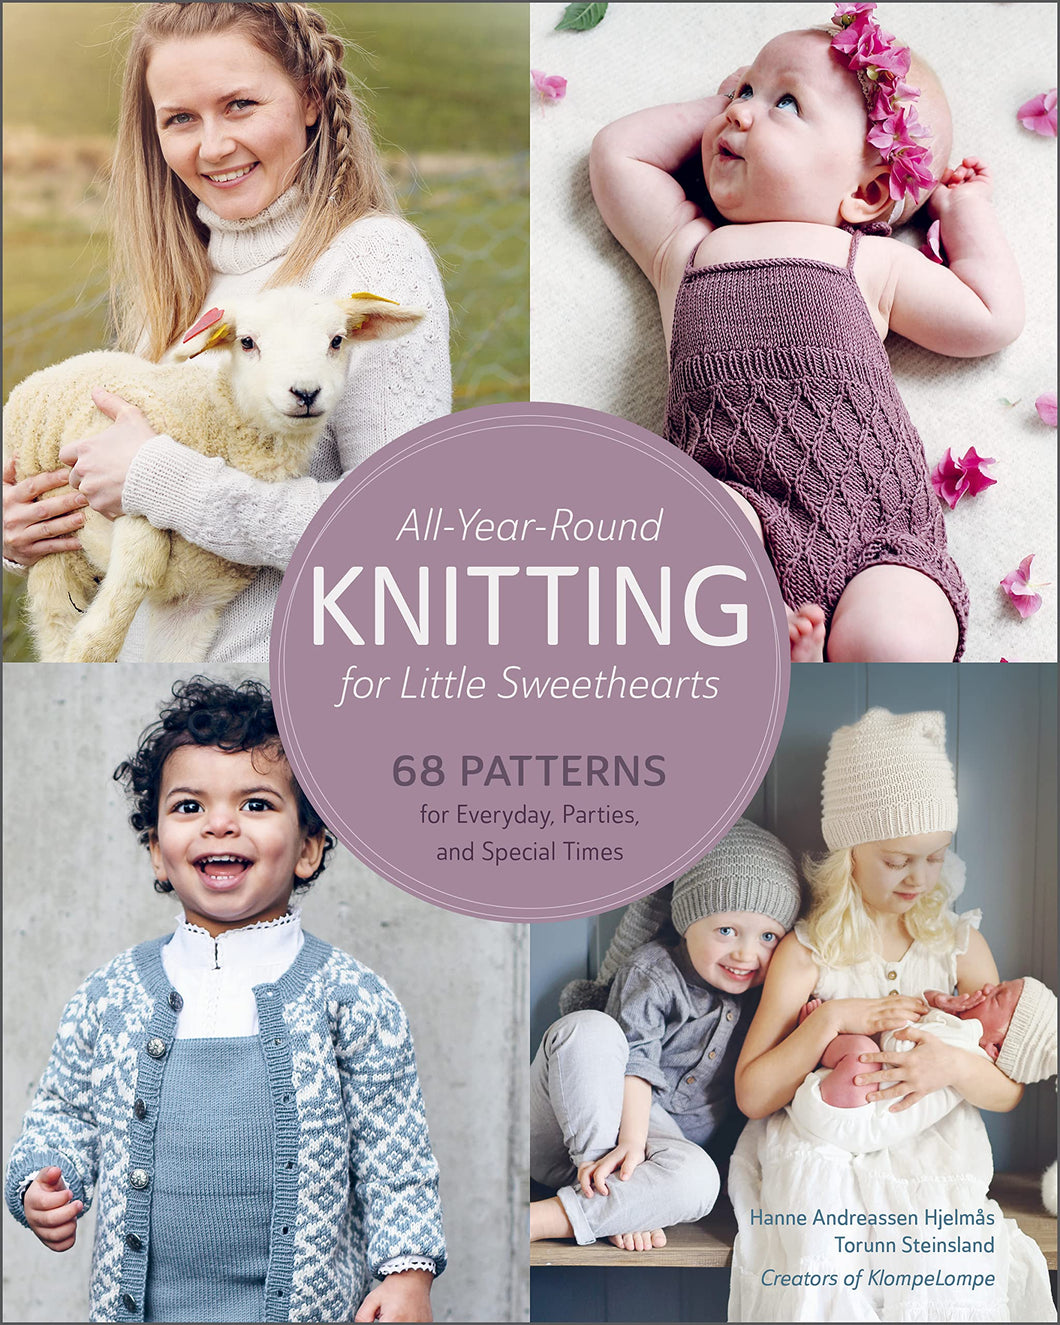 All-Year-Round Knitting for Little Sweethearts